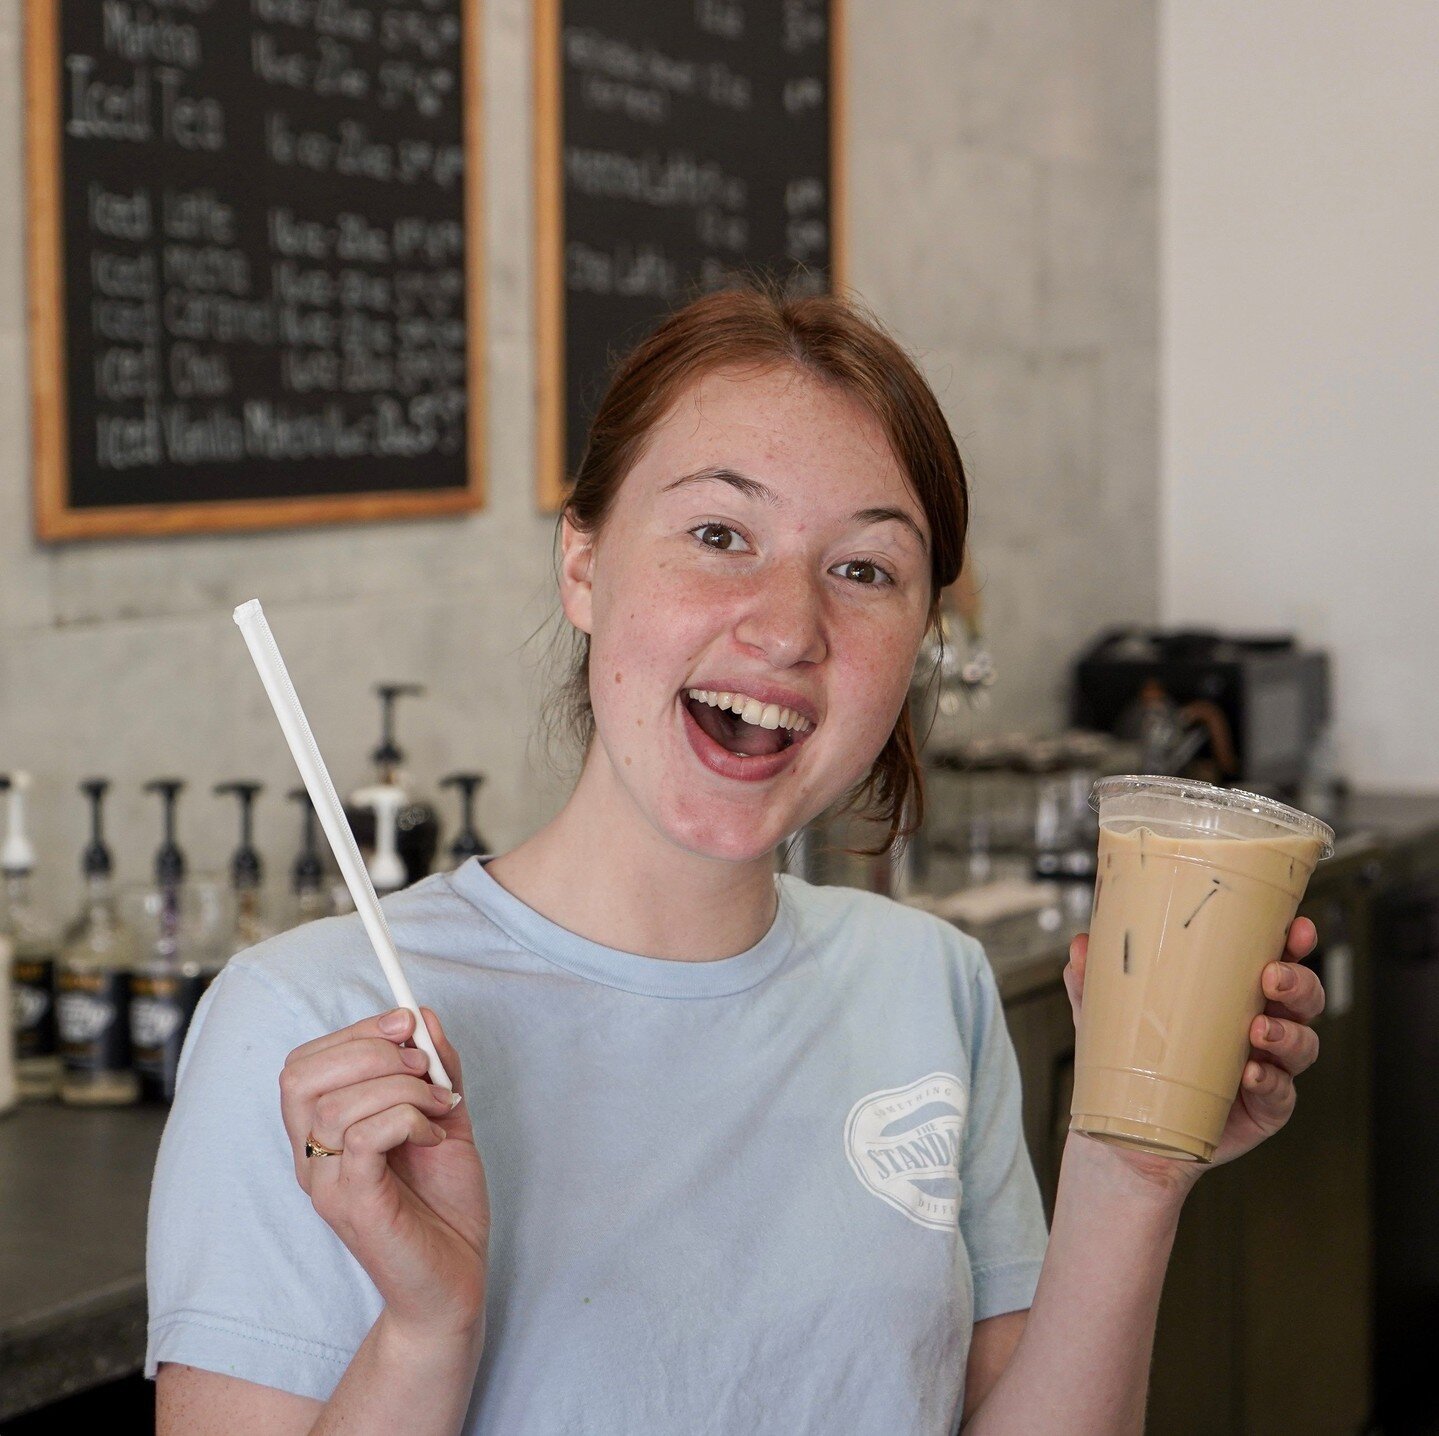 A great Saturday starts with an iced latte. Bree knows what's up!